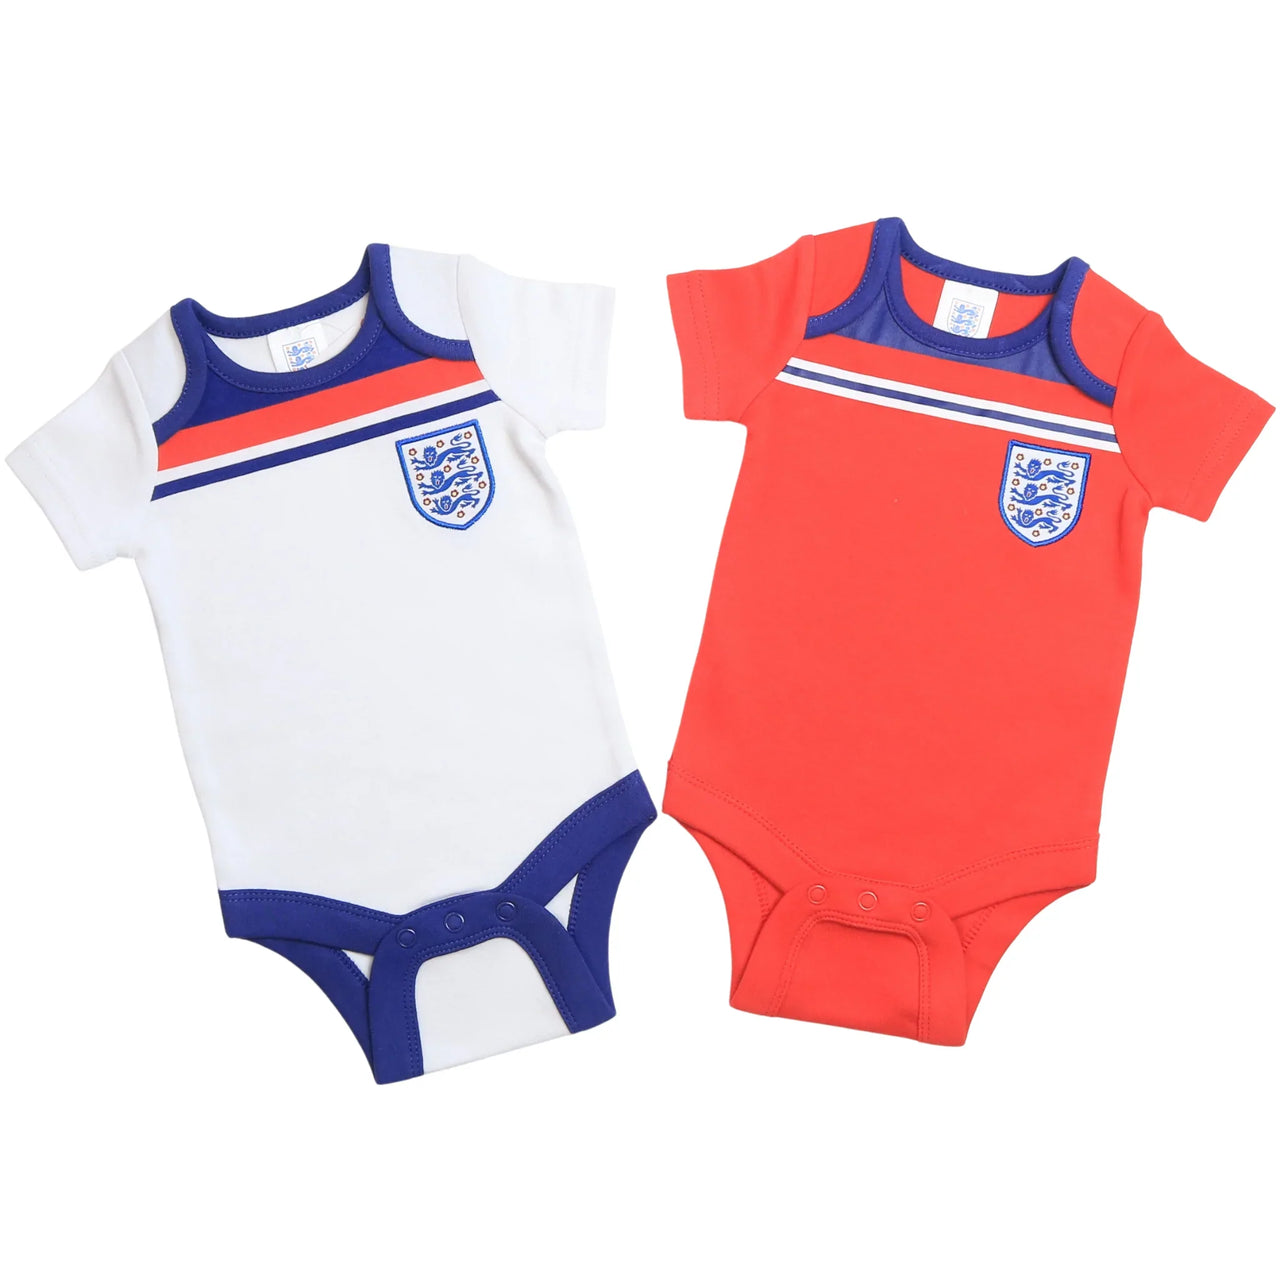 England Football 1982 World Cup Retro Baby 2 Pack Bodysuits